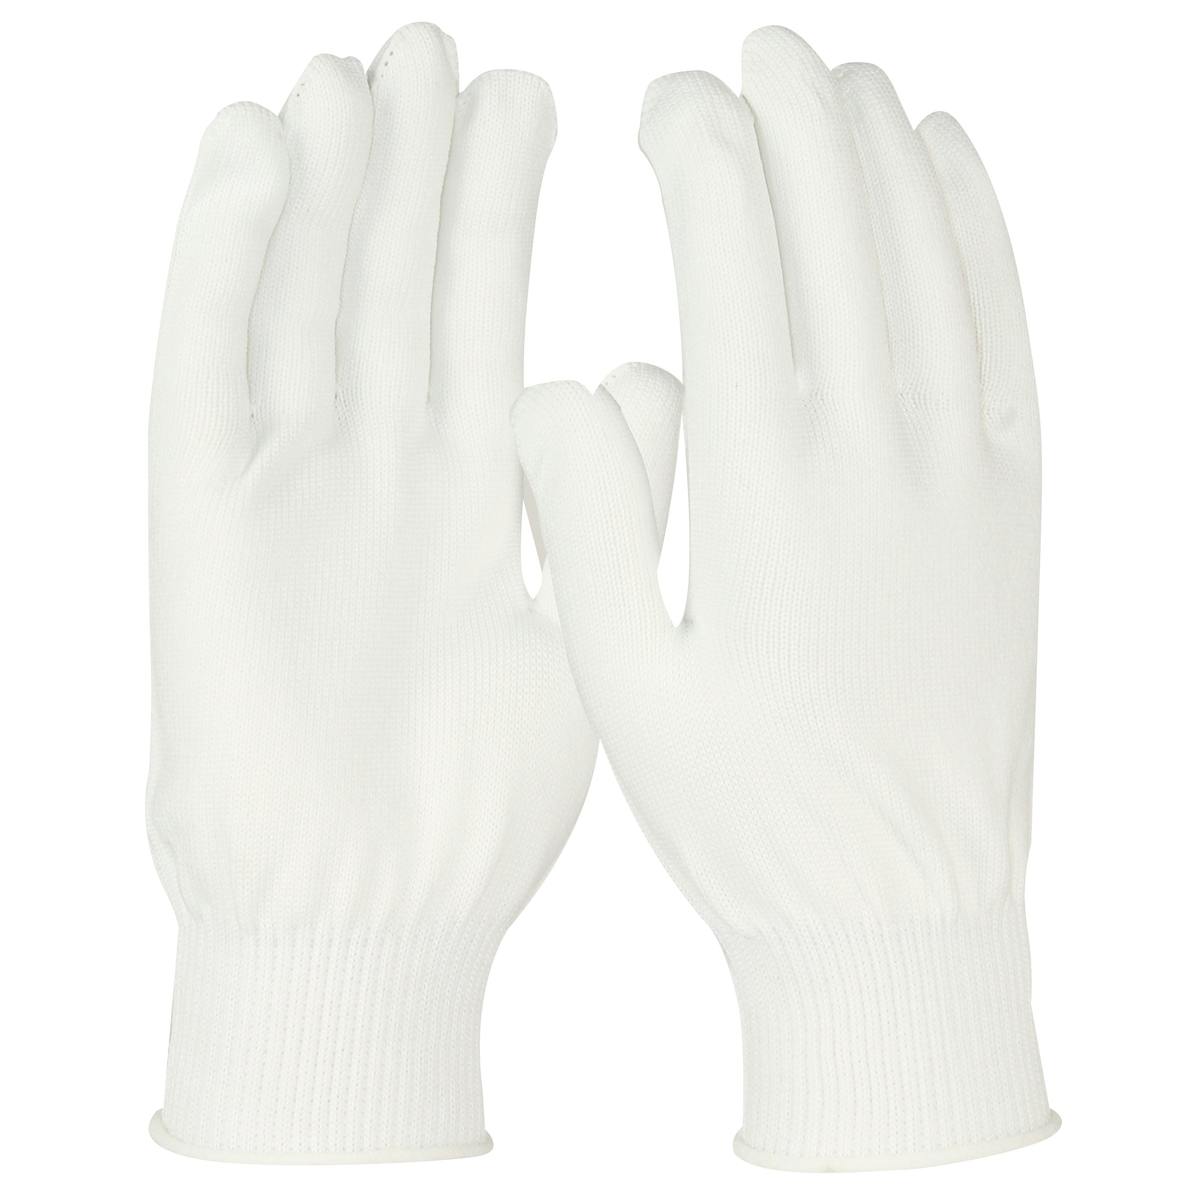 Seamless Knit Polyester Glove - Light Weight, White (M13P) - S